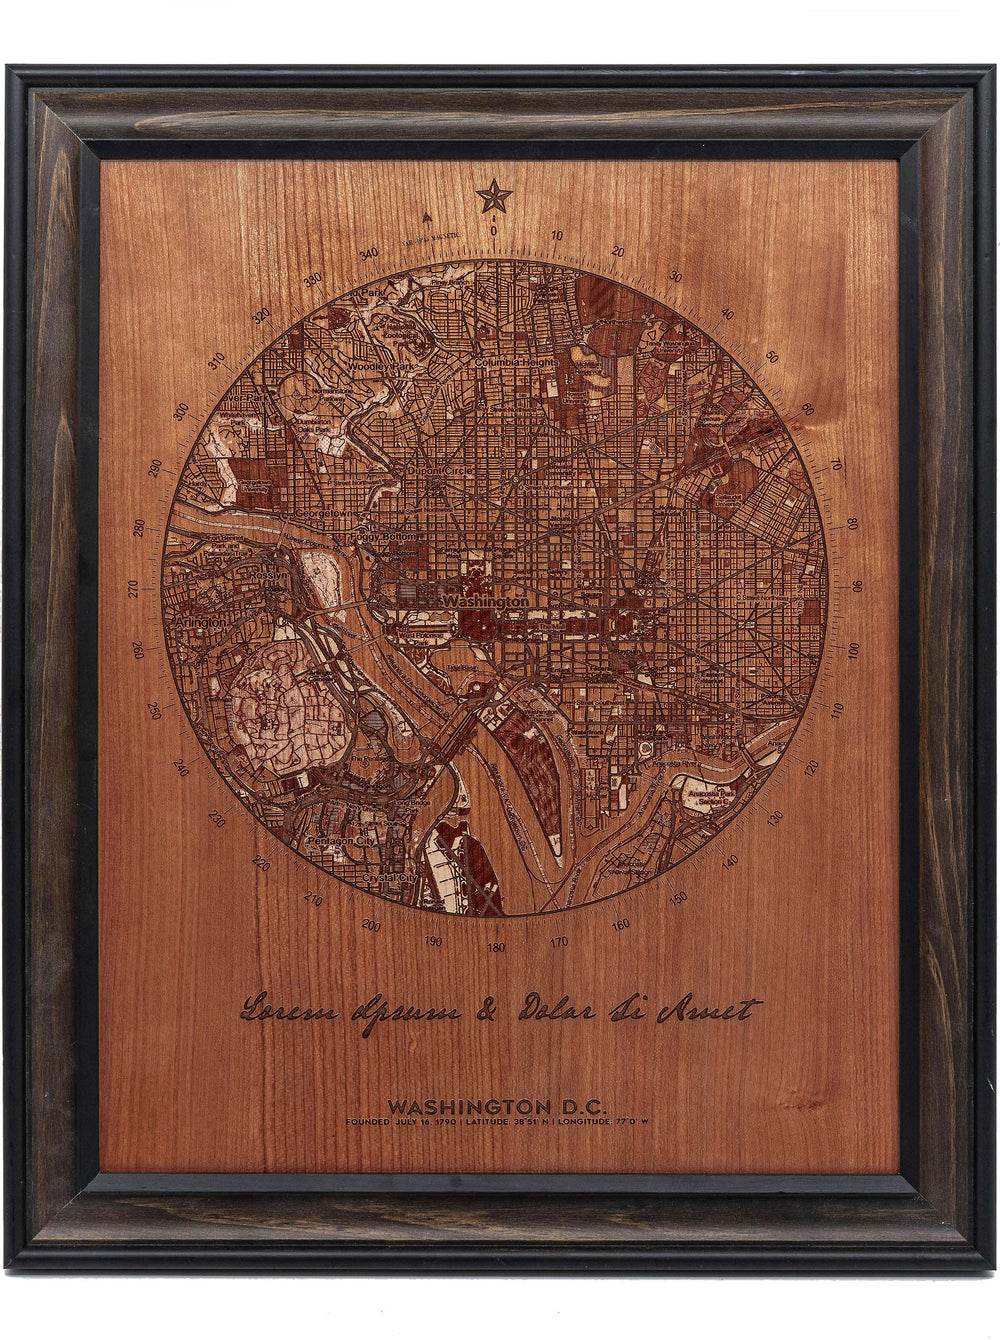 Personalized Engraved Wood Map